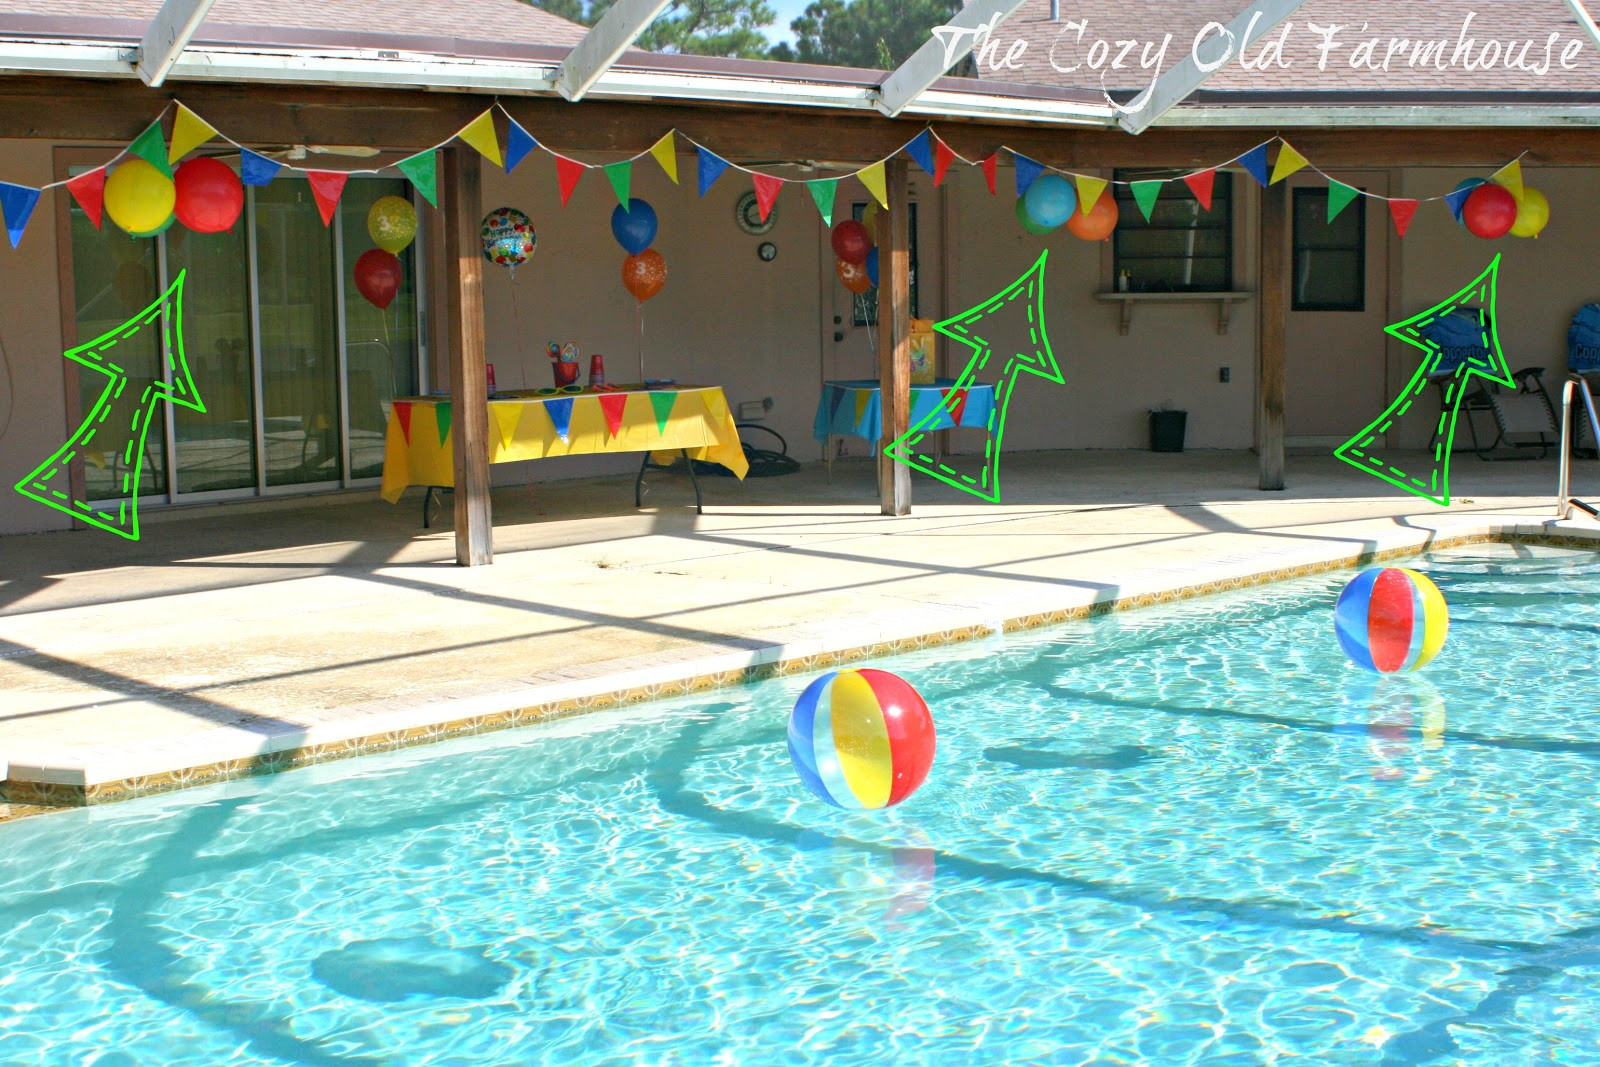 Pool Party Themes For Kids
 The Cozy Old "Farmhouse" Simple and Bud Friendly Pool